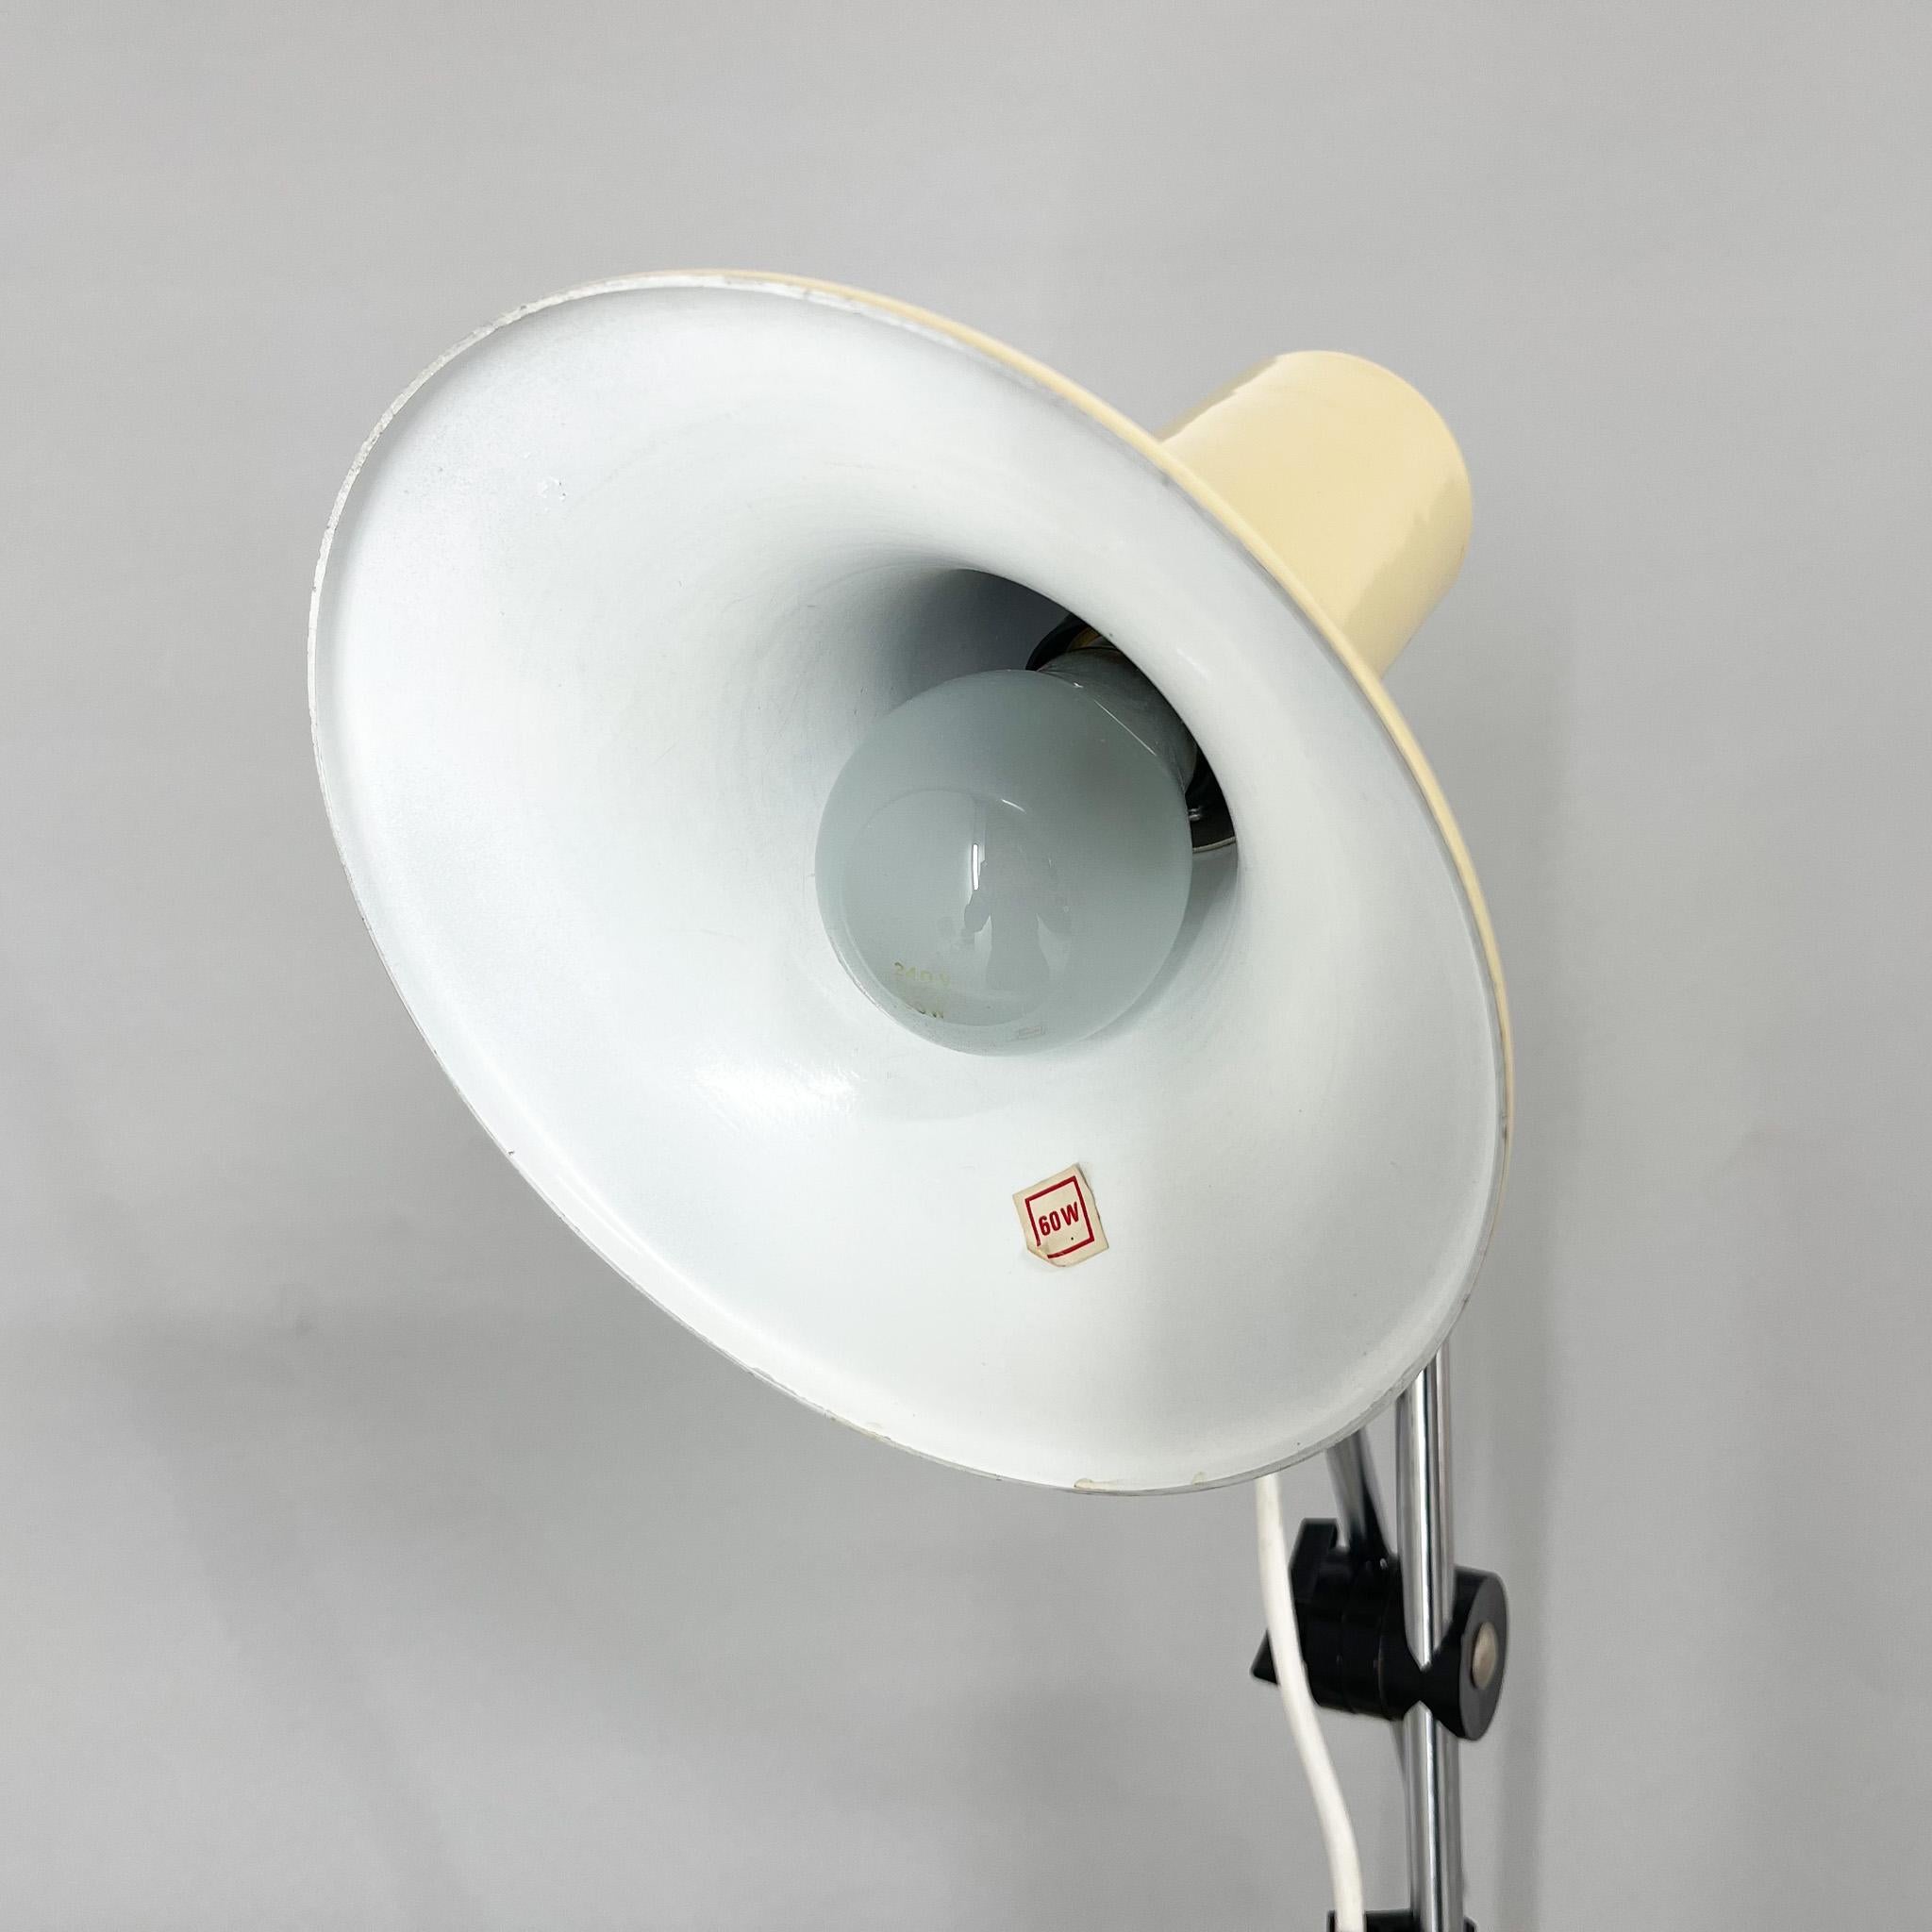 1970s Adjustable Metal Table Lamp in Creamy Color, Hungary For Sale 1